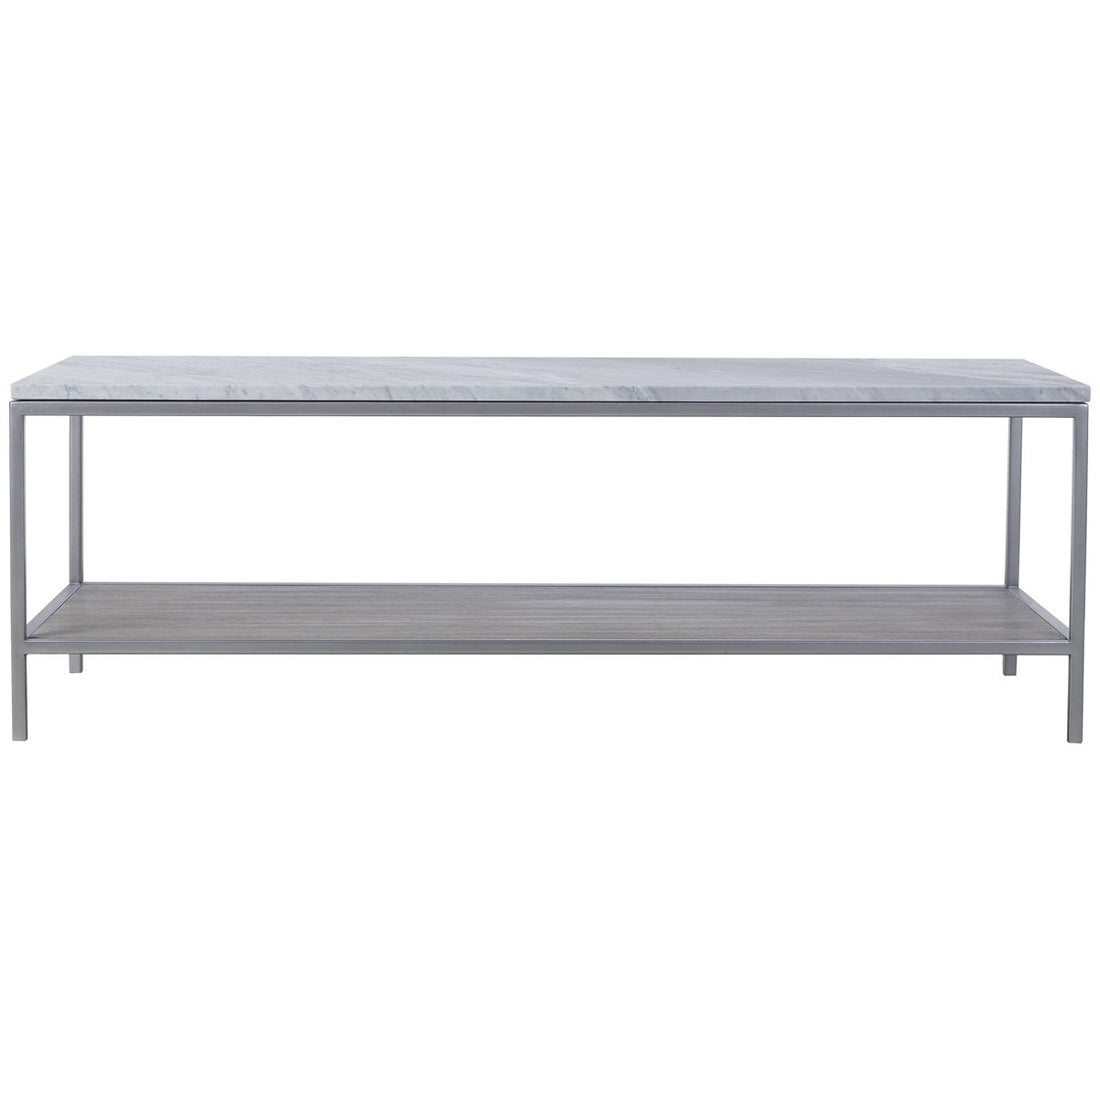 Sonder Living Paxton Rectangle Coffee Table